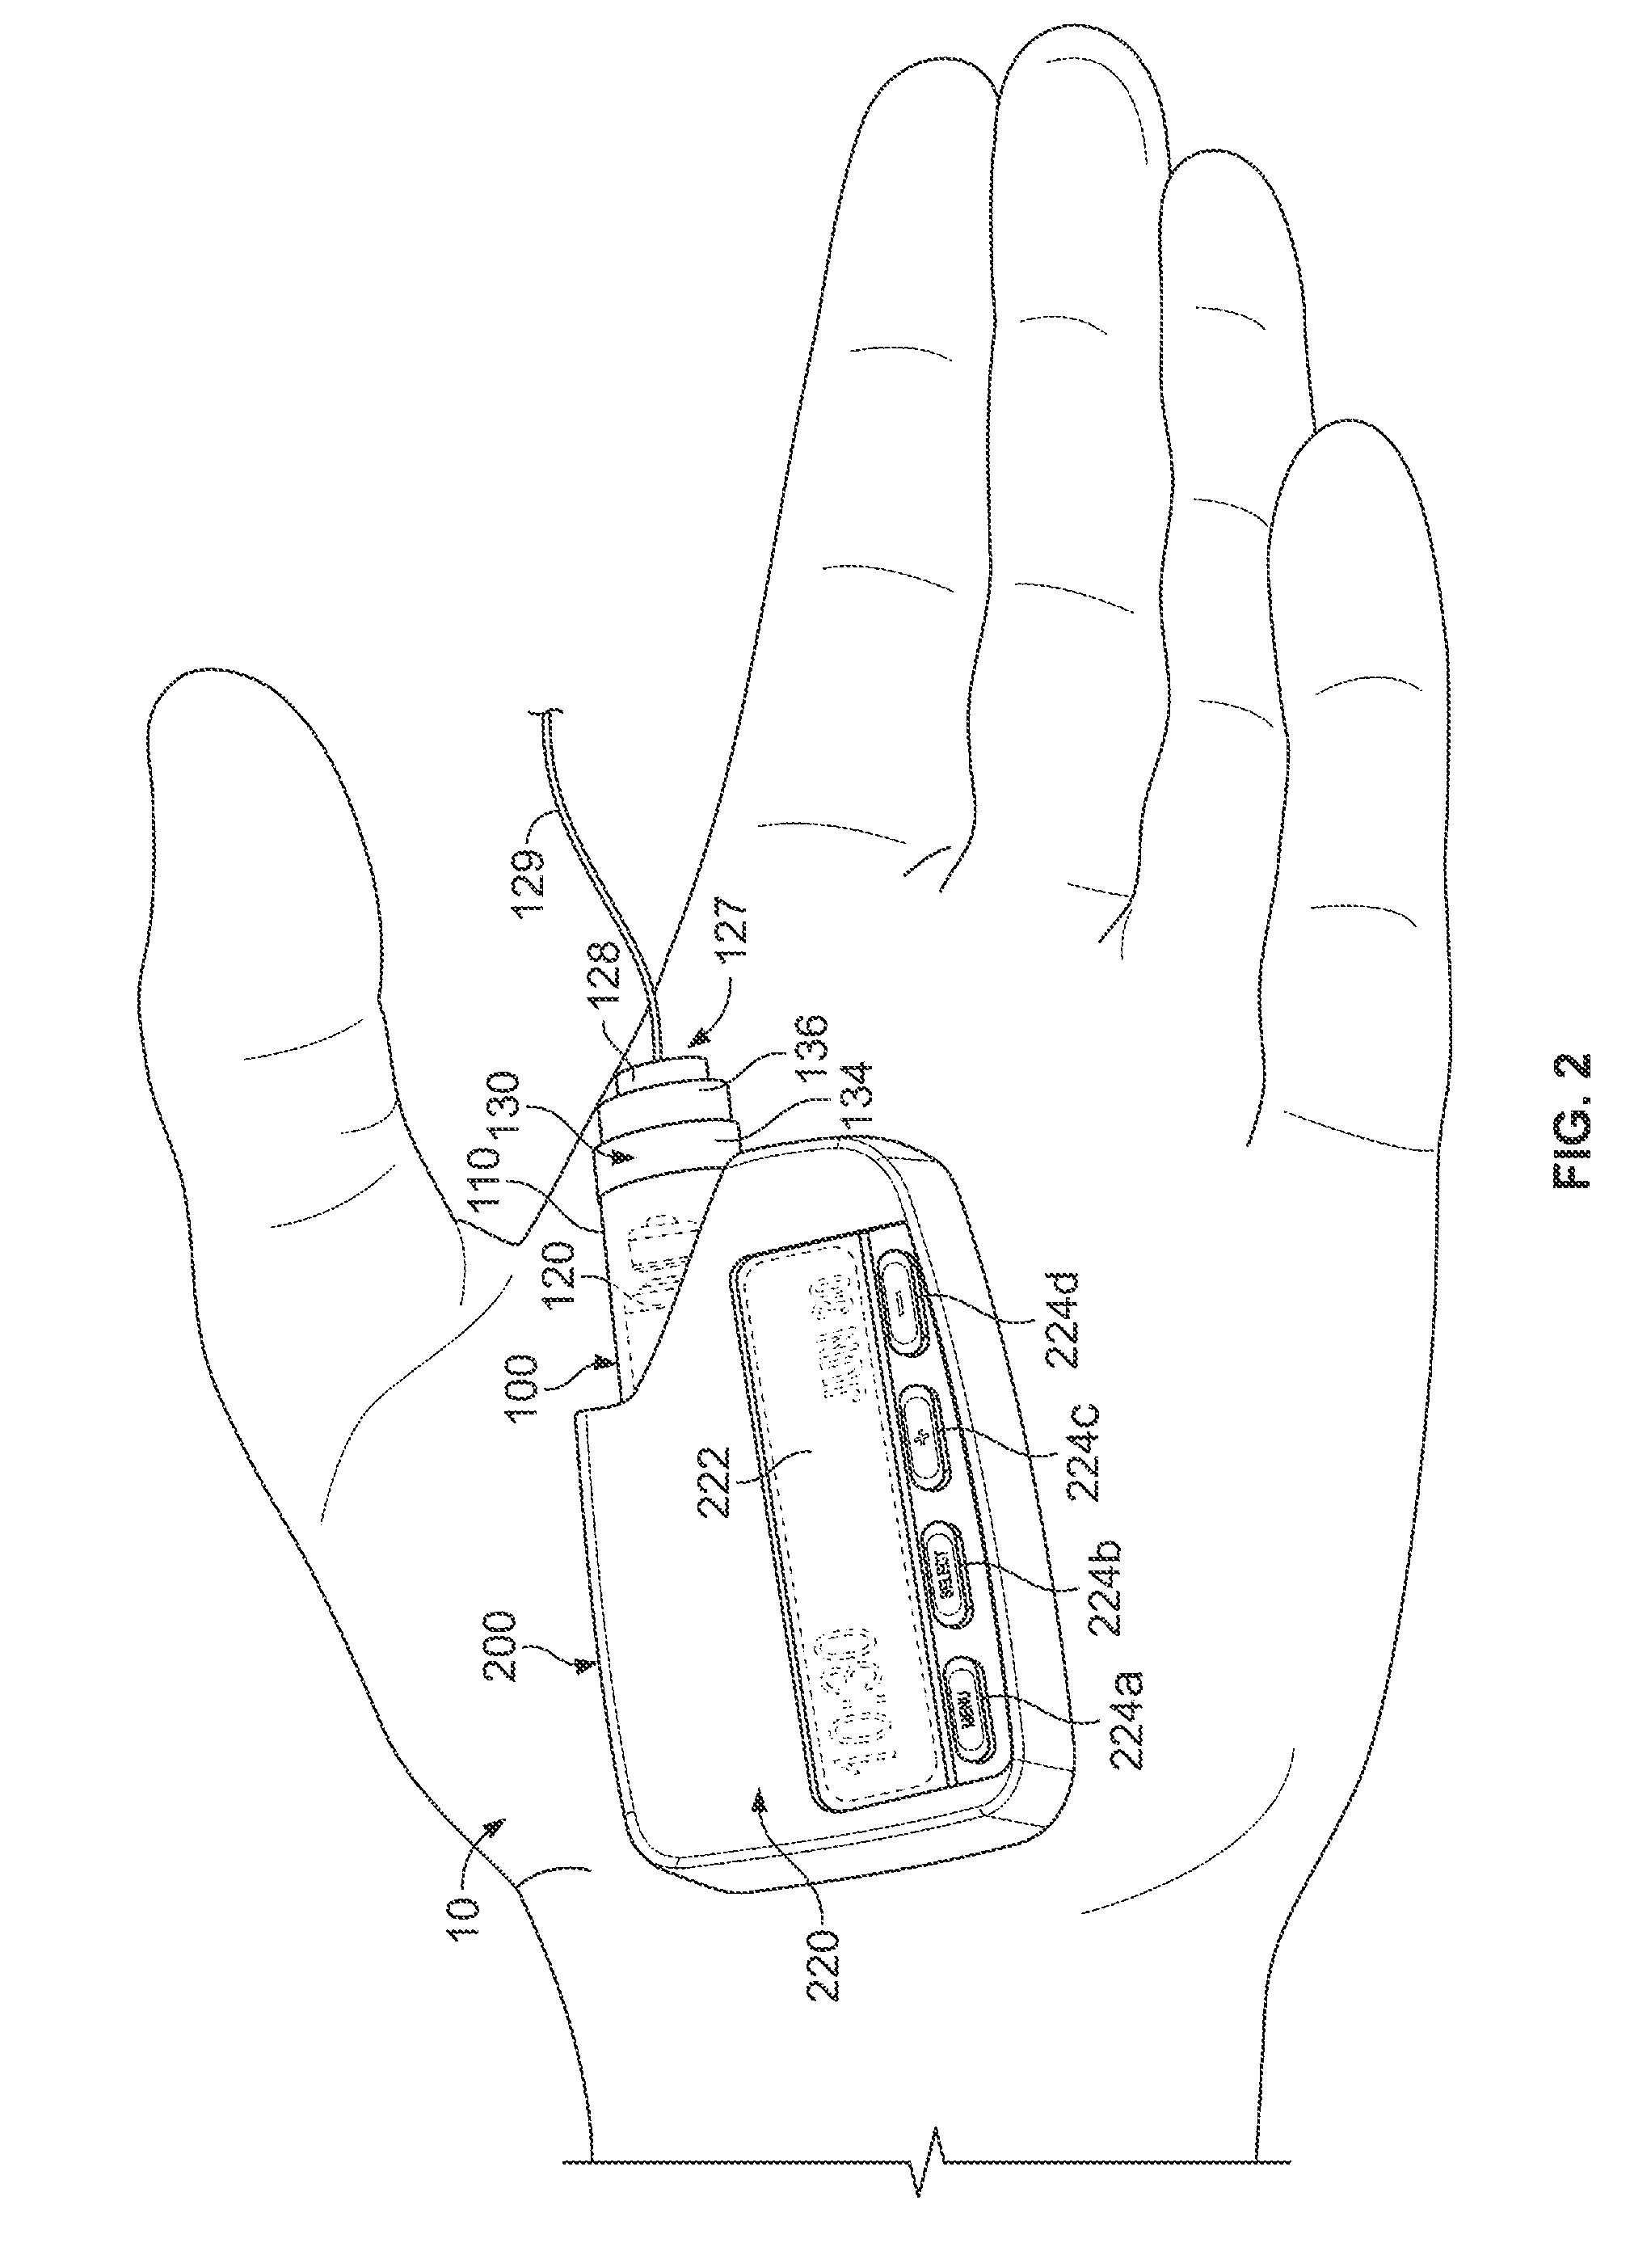 Dispensing Fluid from an Infusion Pump System